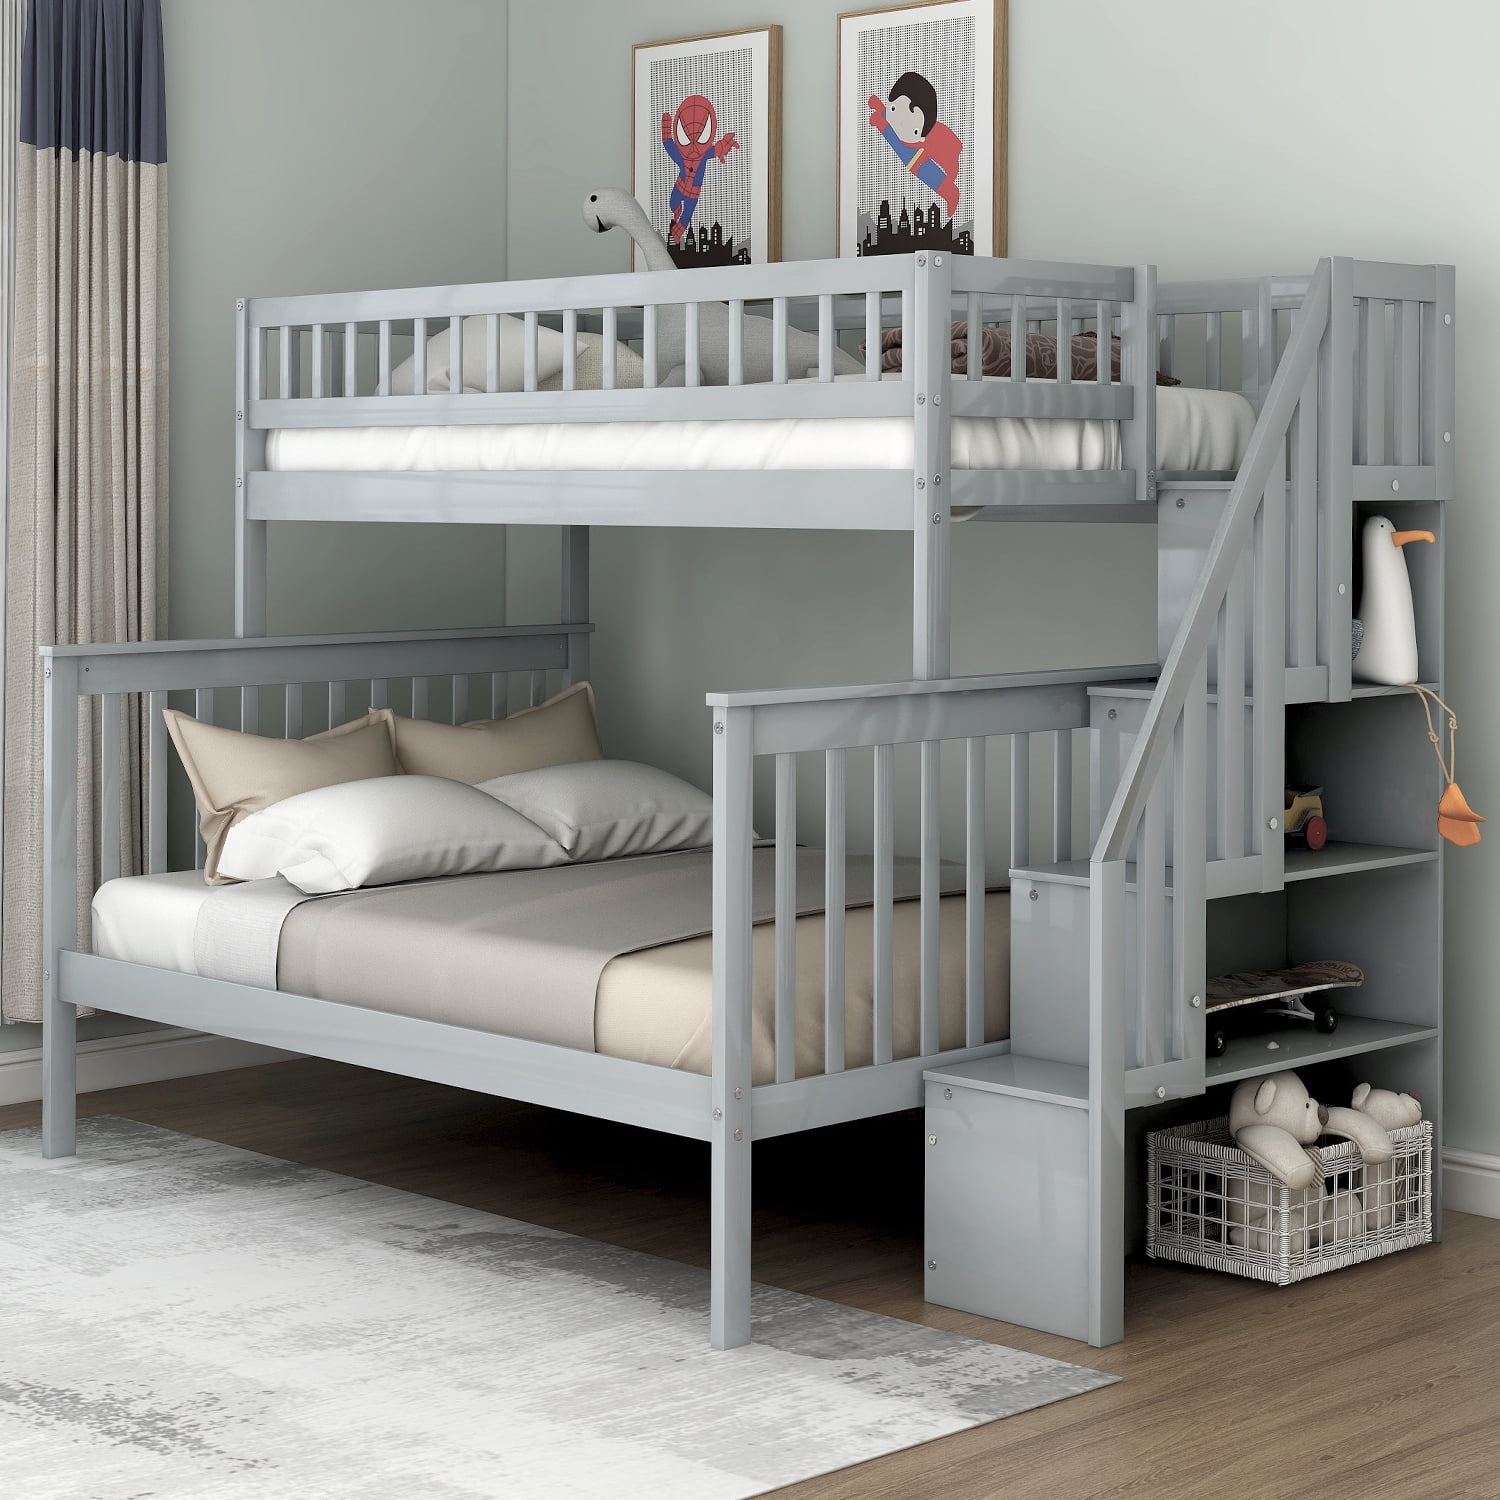 Harperandbright Designs Twin Over Full Wood Bunk Bed With Stairs For Kids